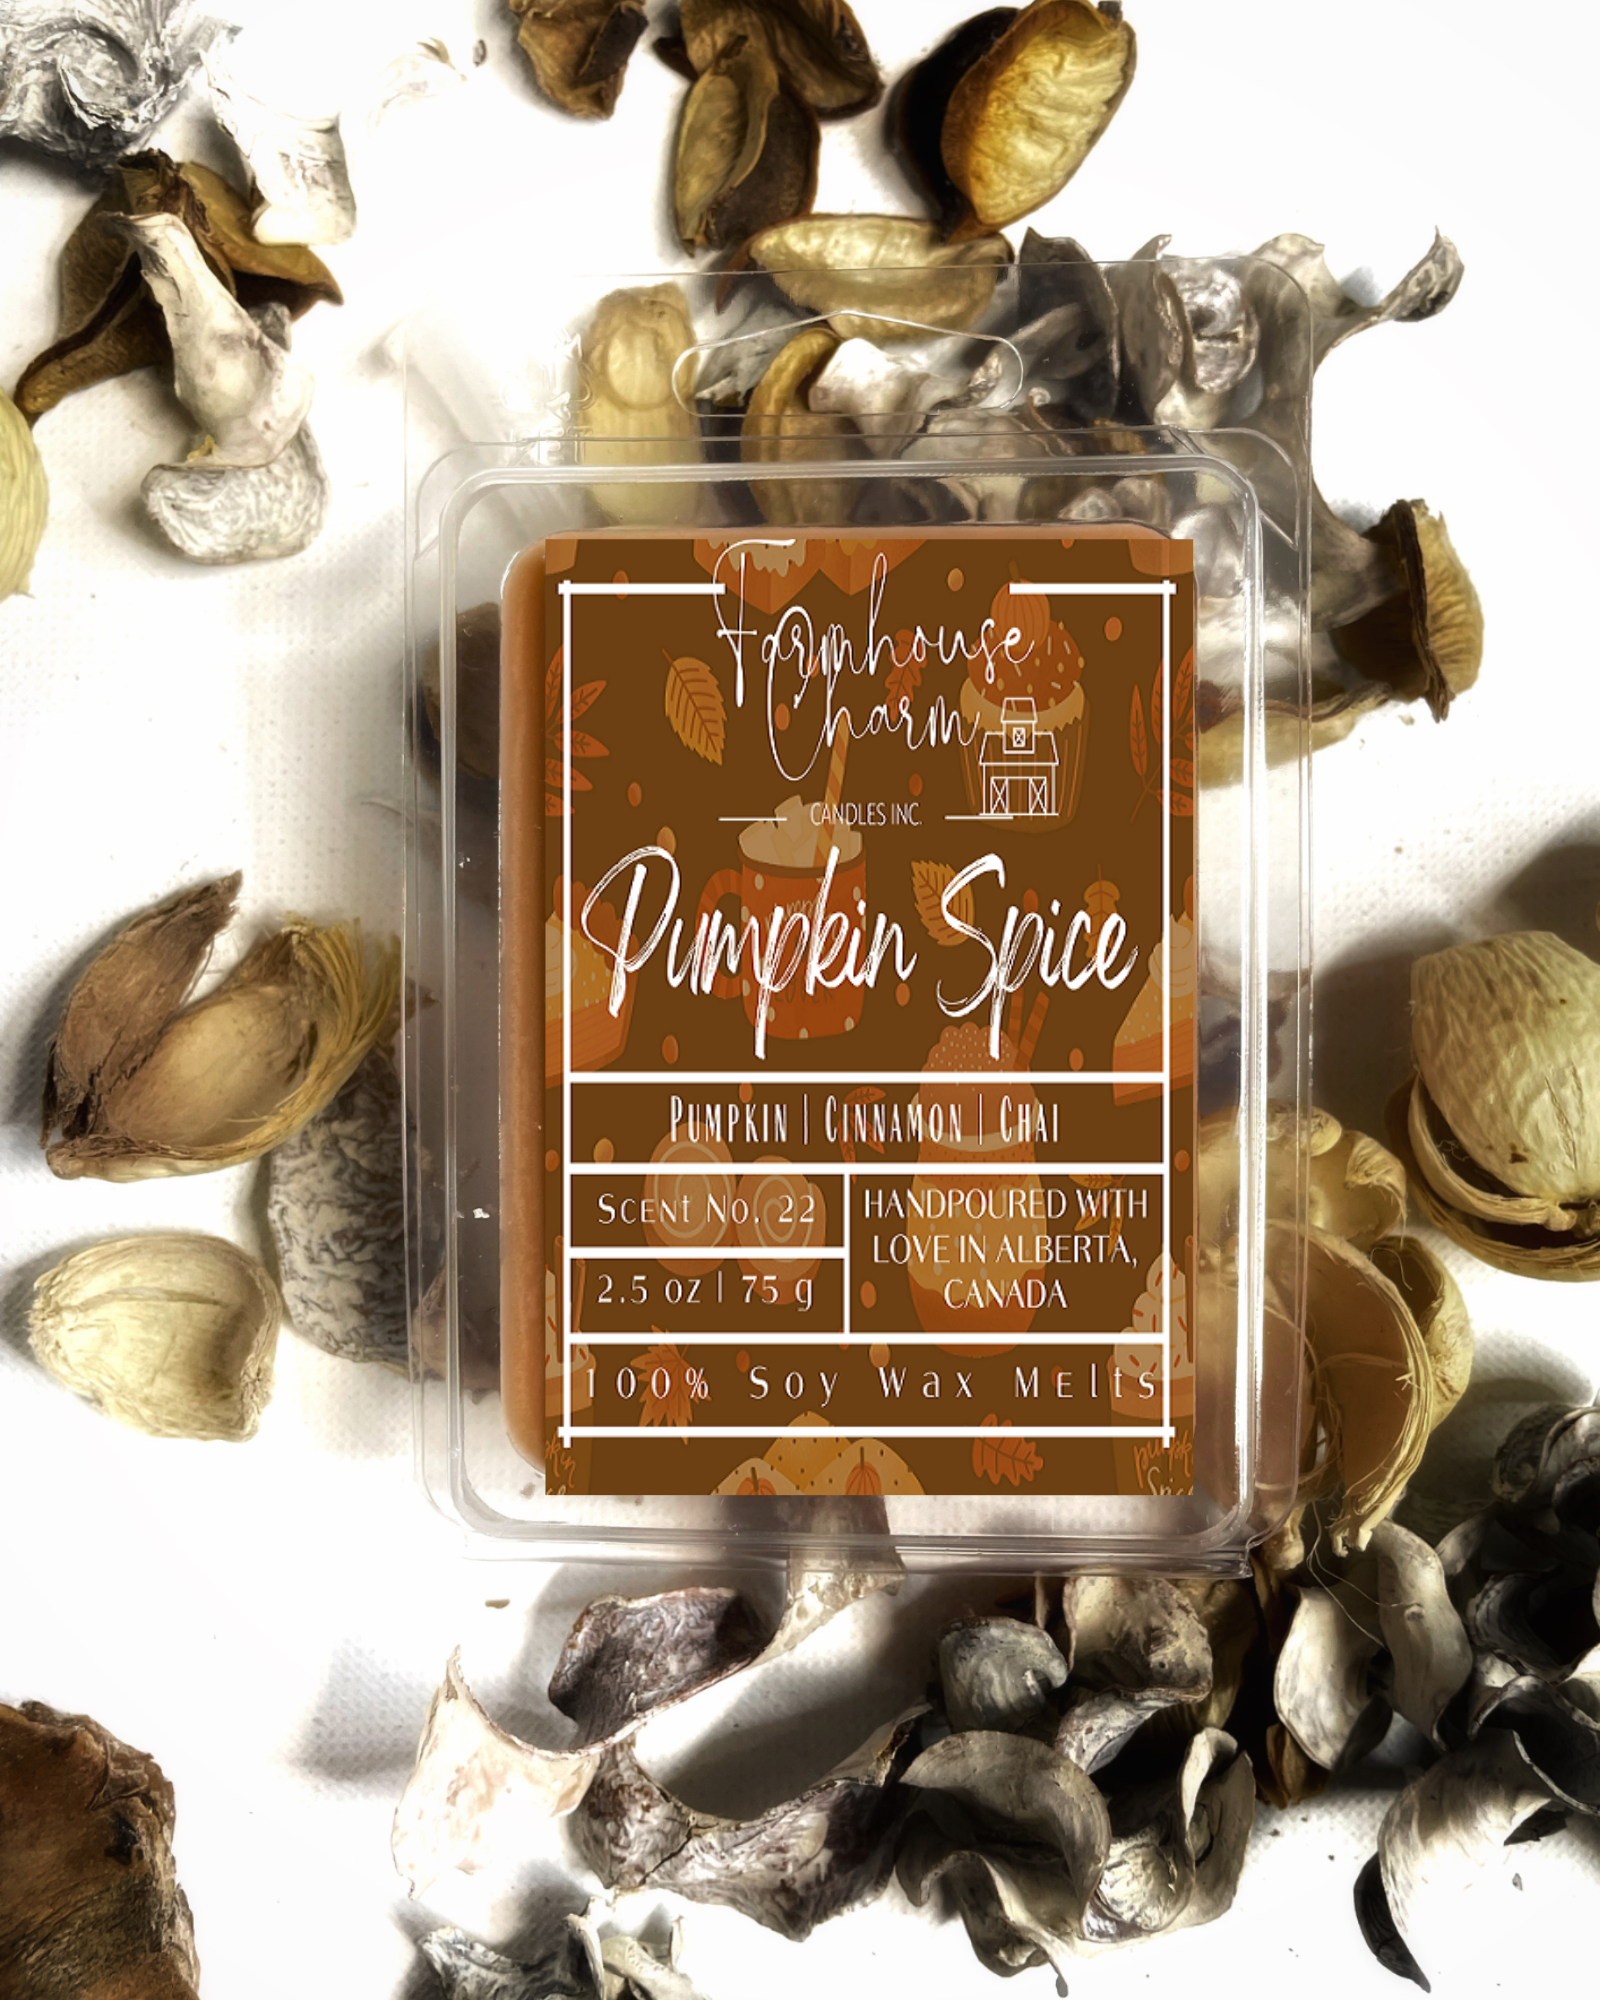 Pumpkin Spice Soy Wax Melts is the perfect addition to your fall décor. The warm and inviting aroma of sweet pumpkin combined with spicy cinnamon, clove and chai tea will fill your home with a cozy and comforting feeling. Whether you're looking to create a cozy atmosphere for a fall gathering or just want to add a touch of warmth to your home, Pumpkin Spice Soy Wax Melts are a must-have.